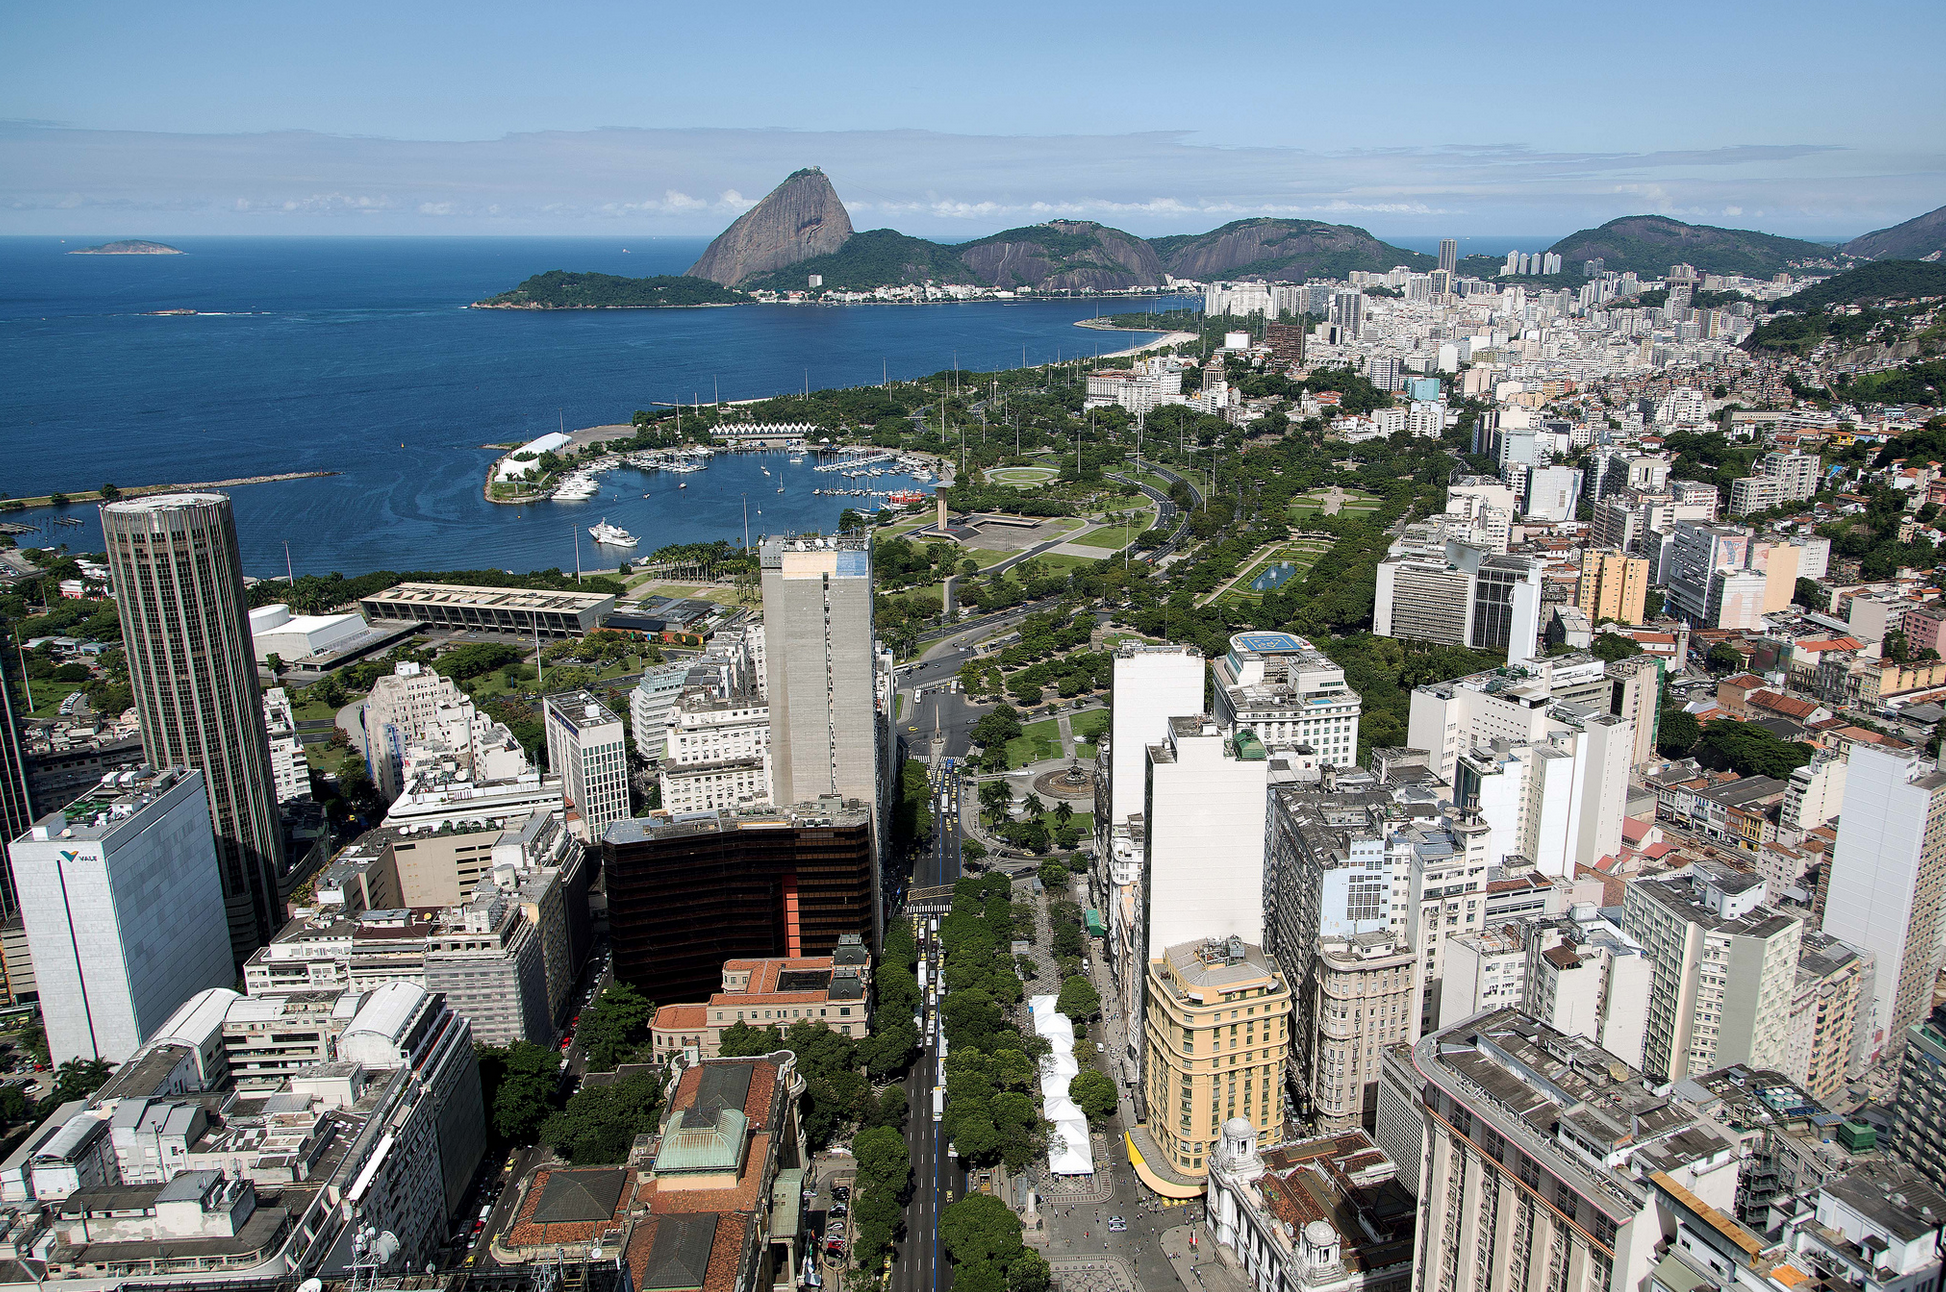 Brazil Real Estate Indicators Plunged to Record Lows in 2016